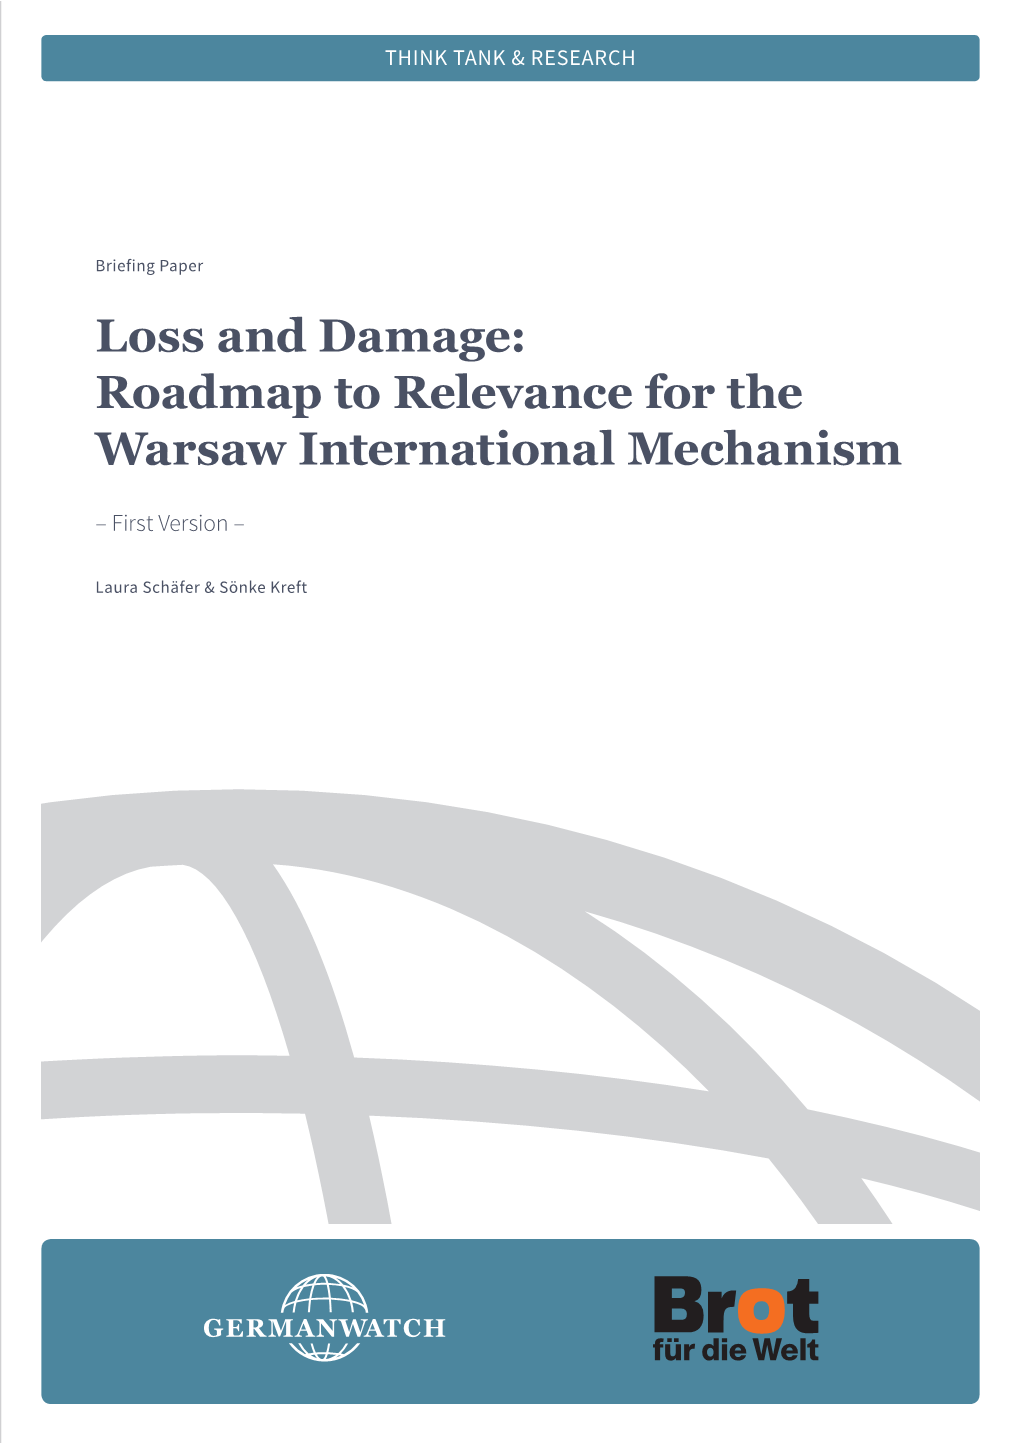 Loss and Damage: Roadmap to Relevance for the Warsaw International Mechanism